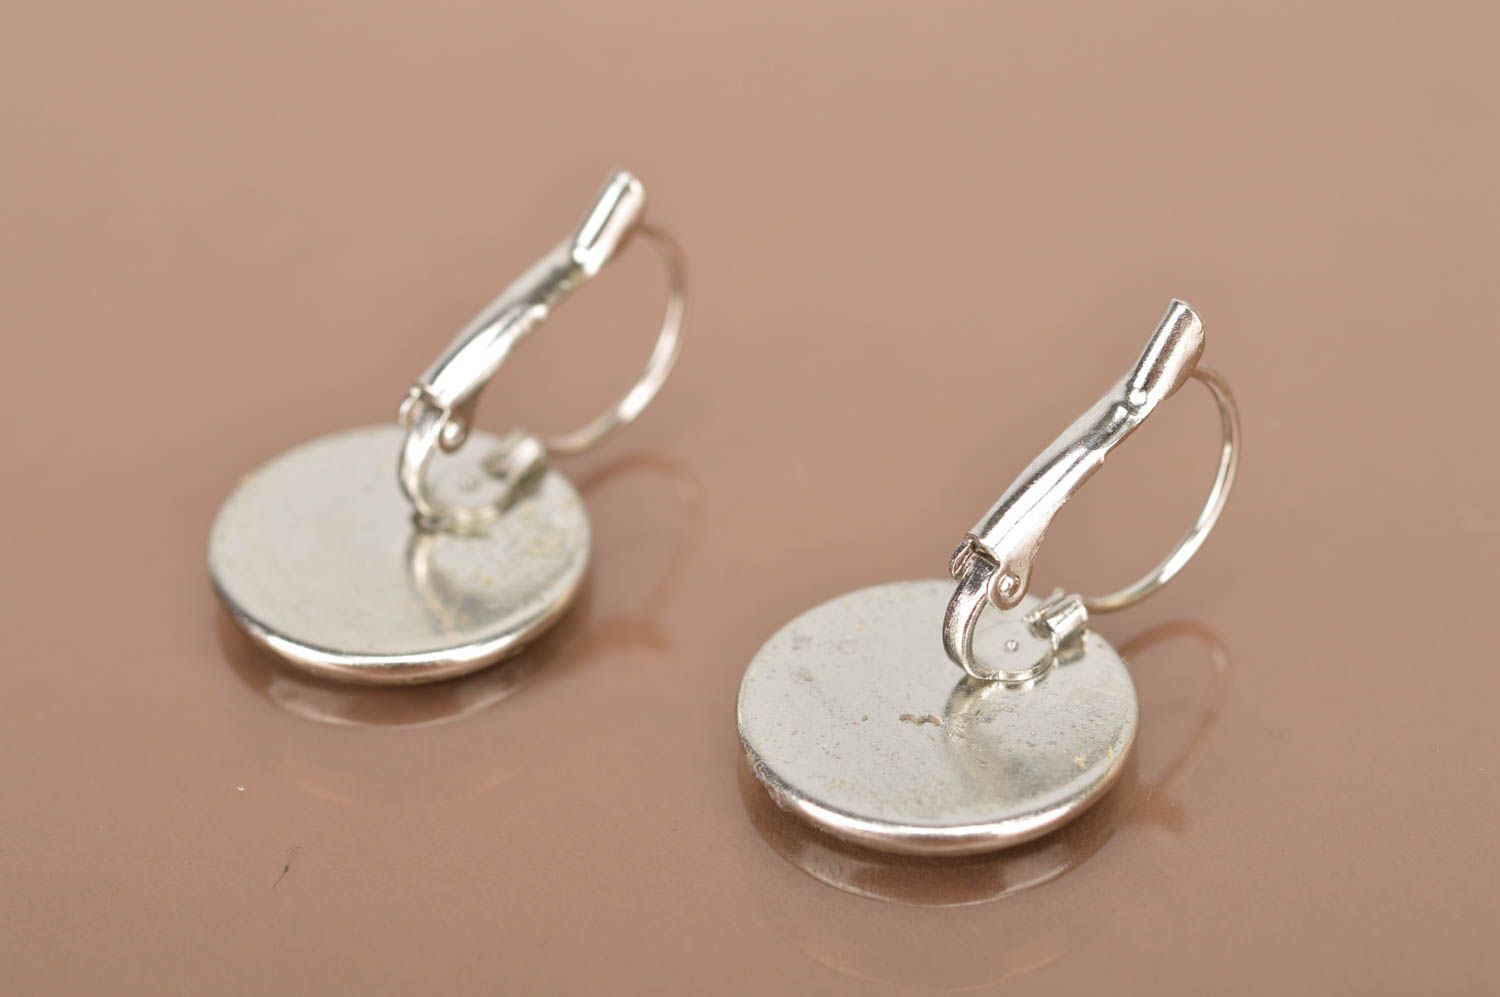 Handmade jewelry earrings designs unique earrings metal jewelry gifts for girl photo 3